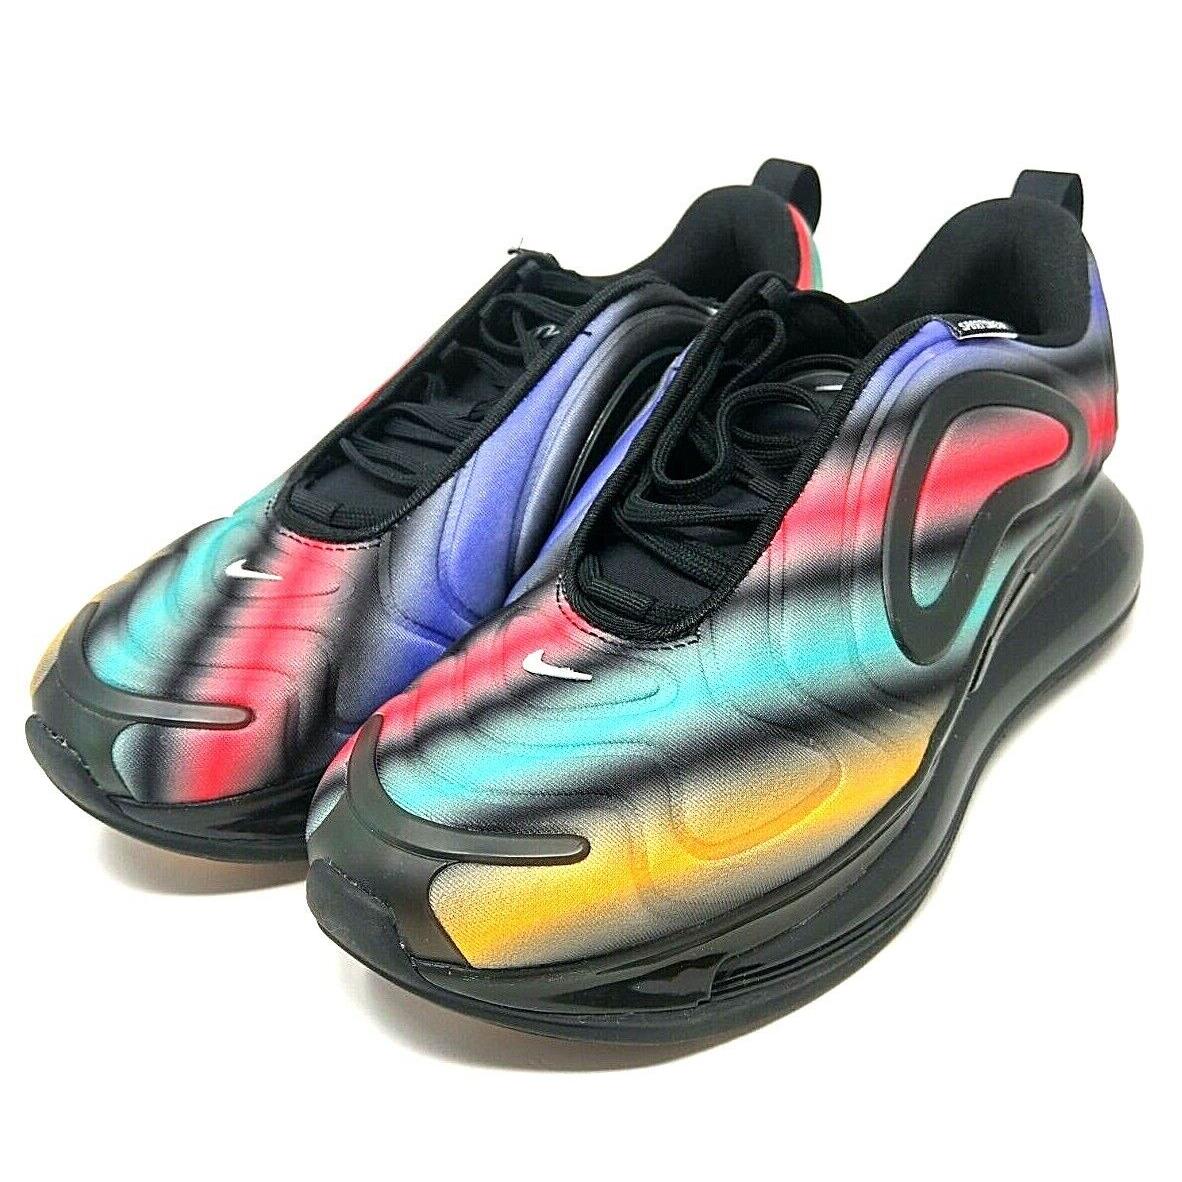 Nike Air Max 720 GS Running Shoes AQ3196 011 Youth US 6.5 Women s Size US 8